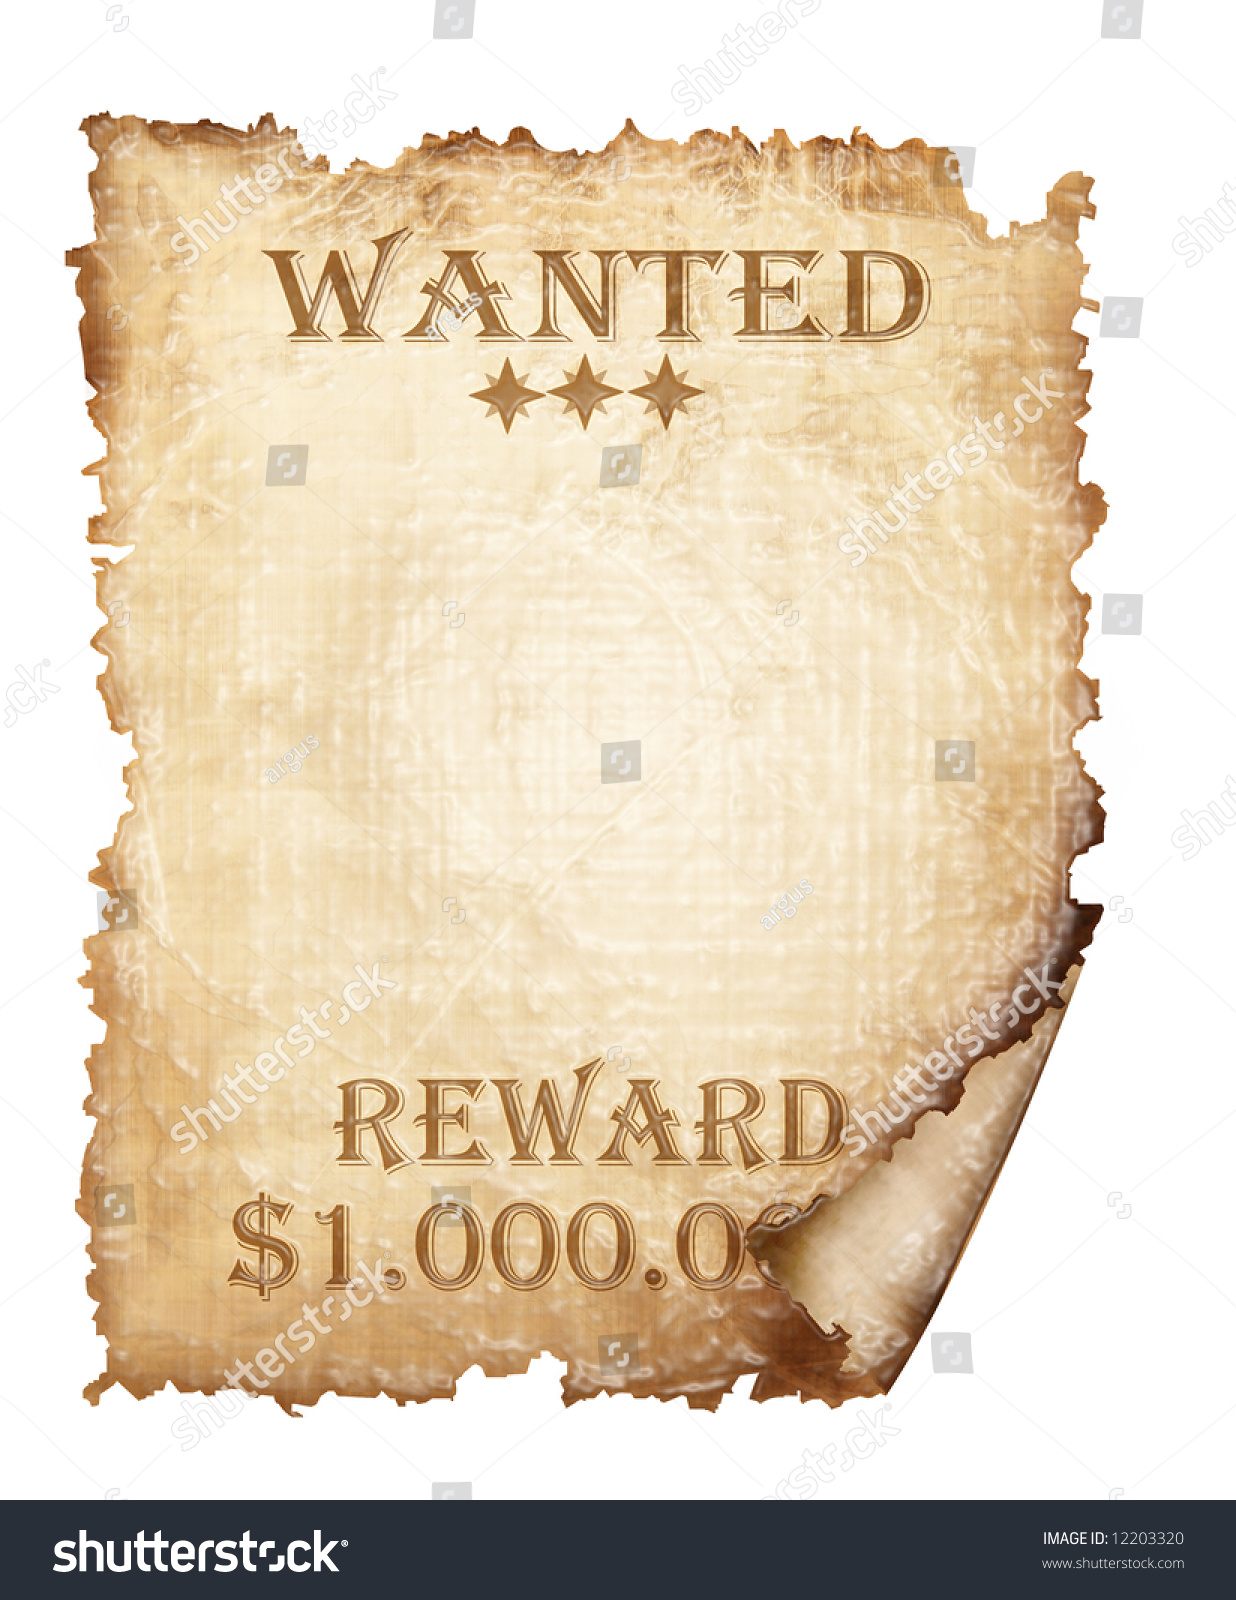 A Vintage Wanted Sign Isolated On White Background Stock Photo 12203320 ...